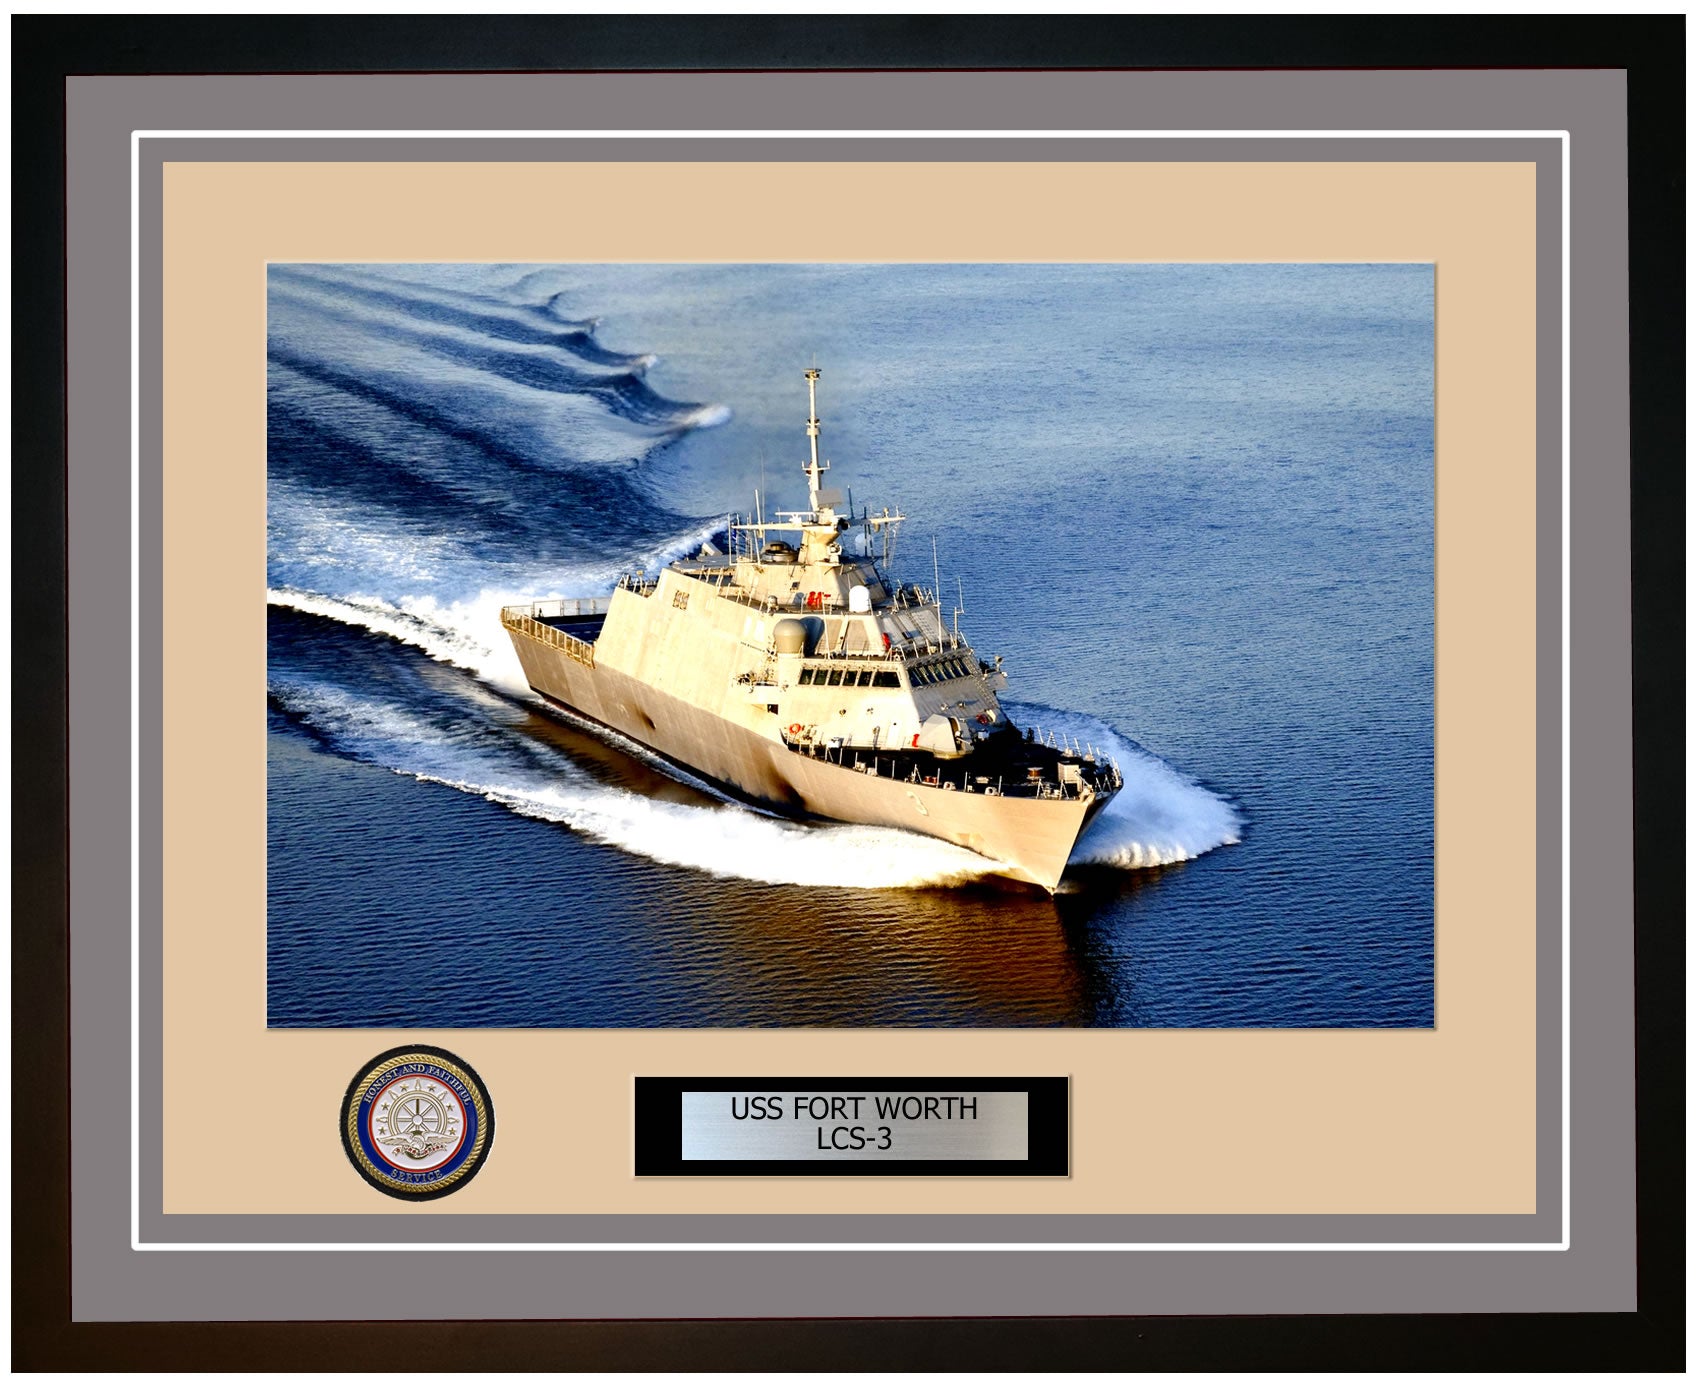 USS Fort Worth LCS-3 Framed Navy Ship Photo Grey